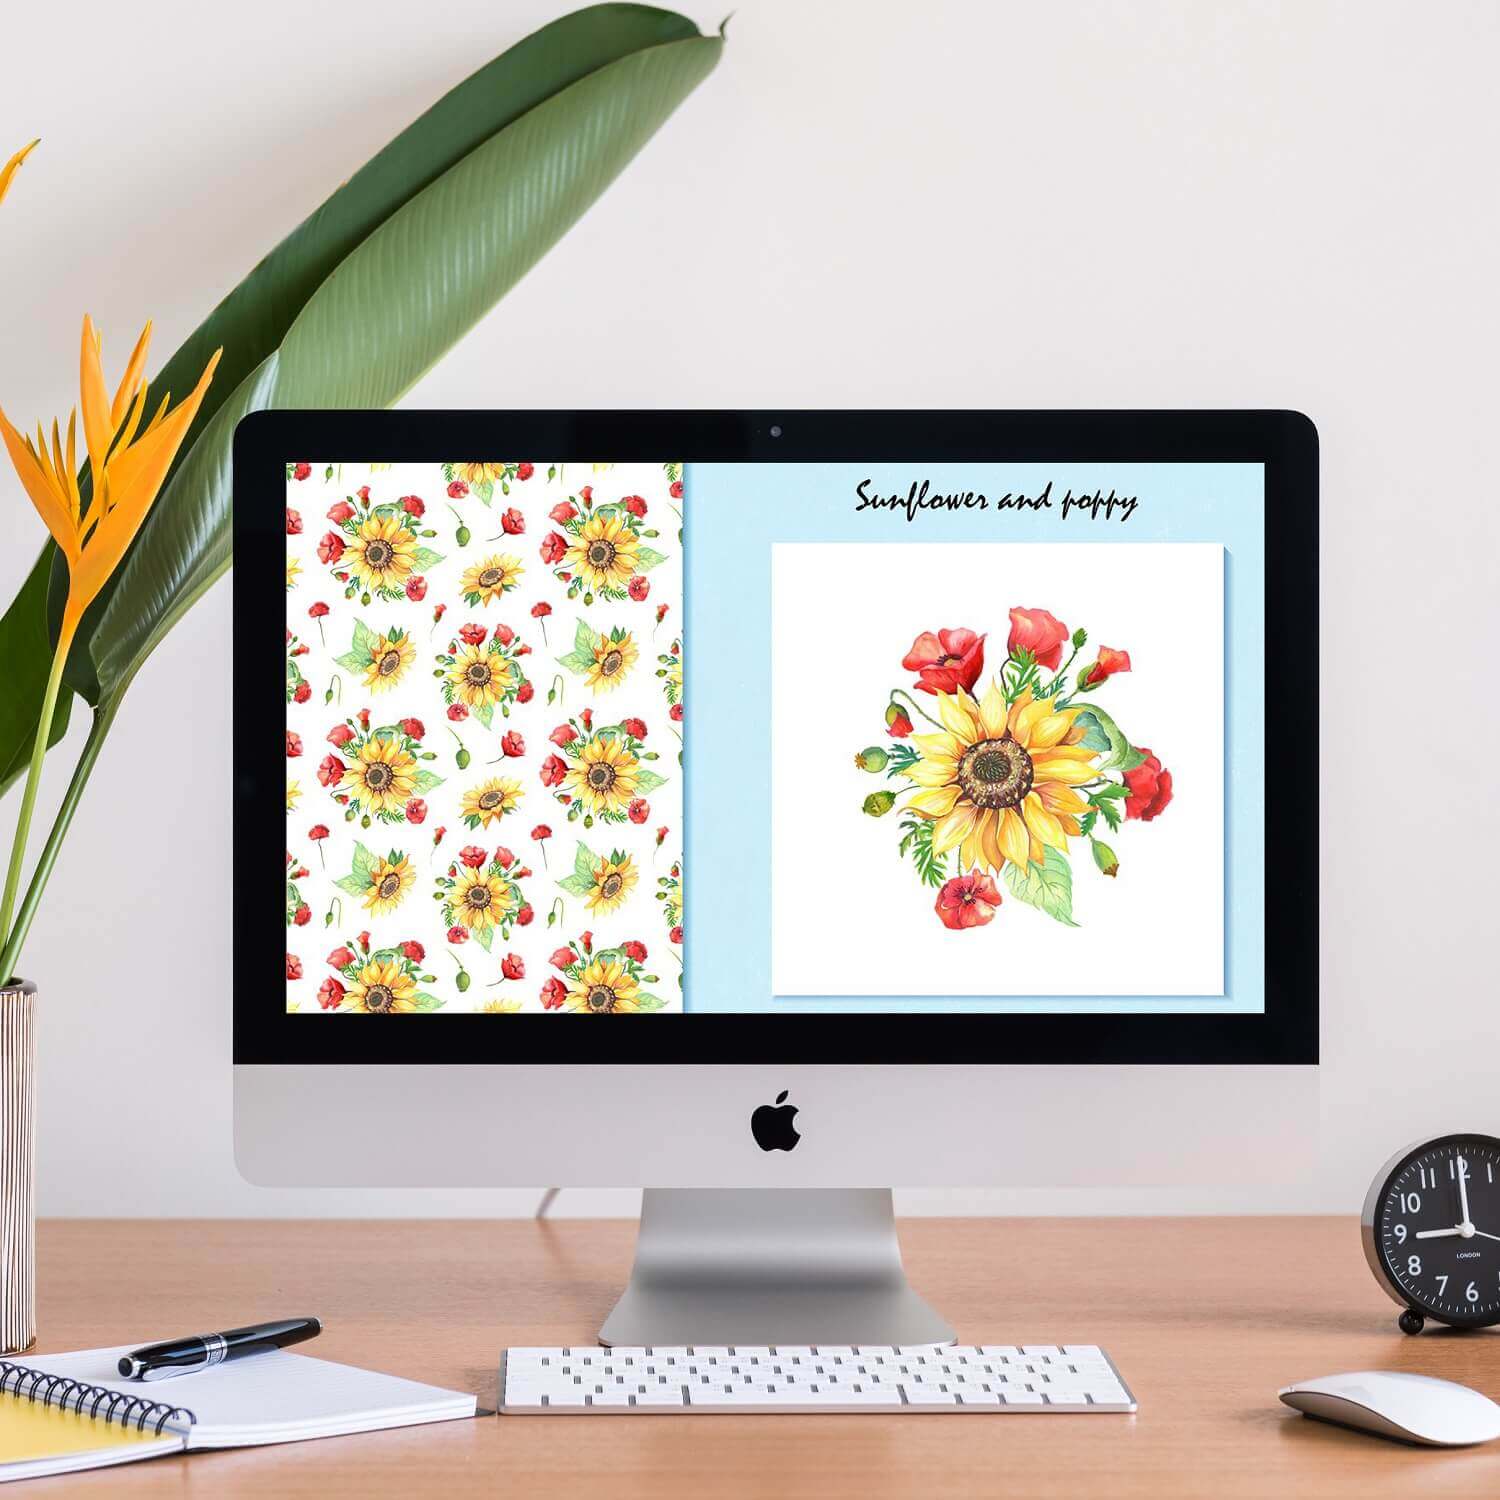 Seamless pattern with sunflowers and poppies in watercolor and a postcard with a title on a blue background.